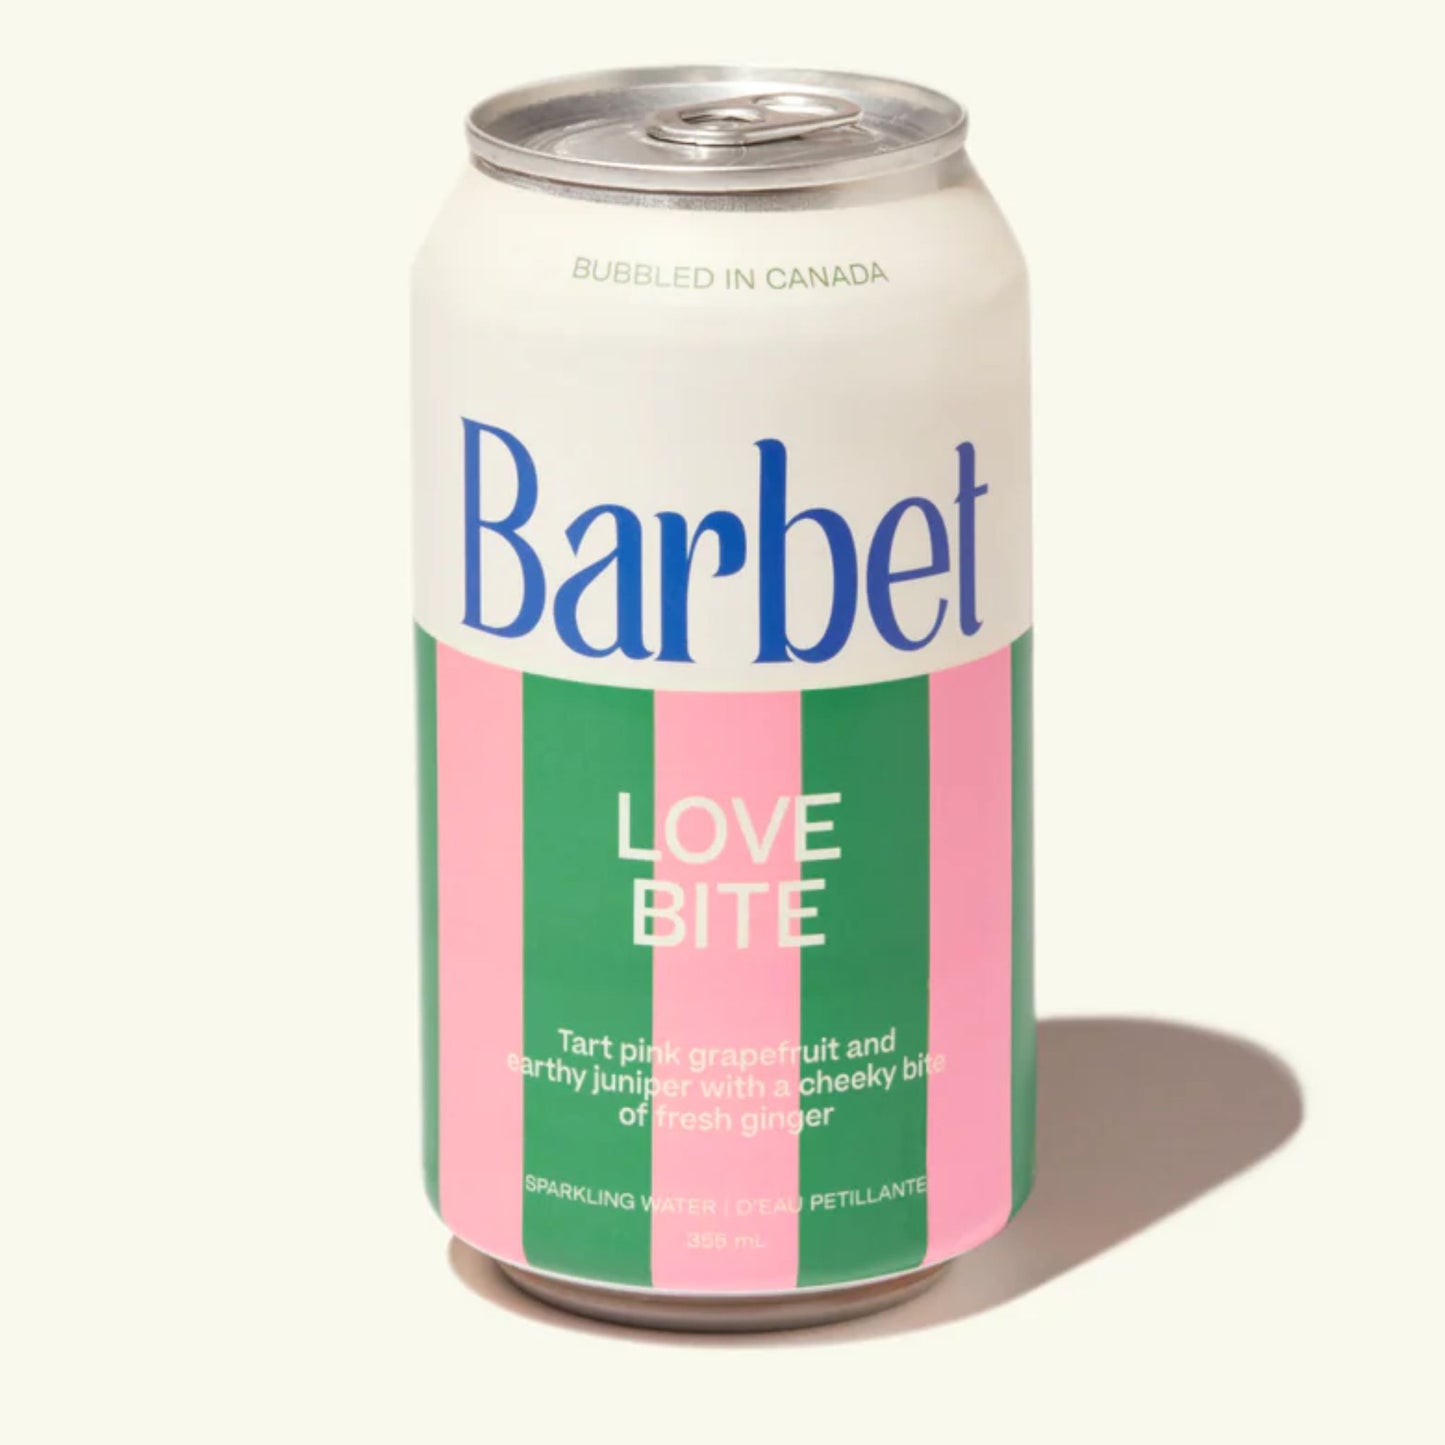 Barbet Love Bite is available for sale at Knyota Drinks in Ottawa.